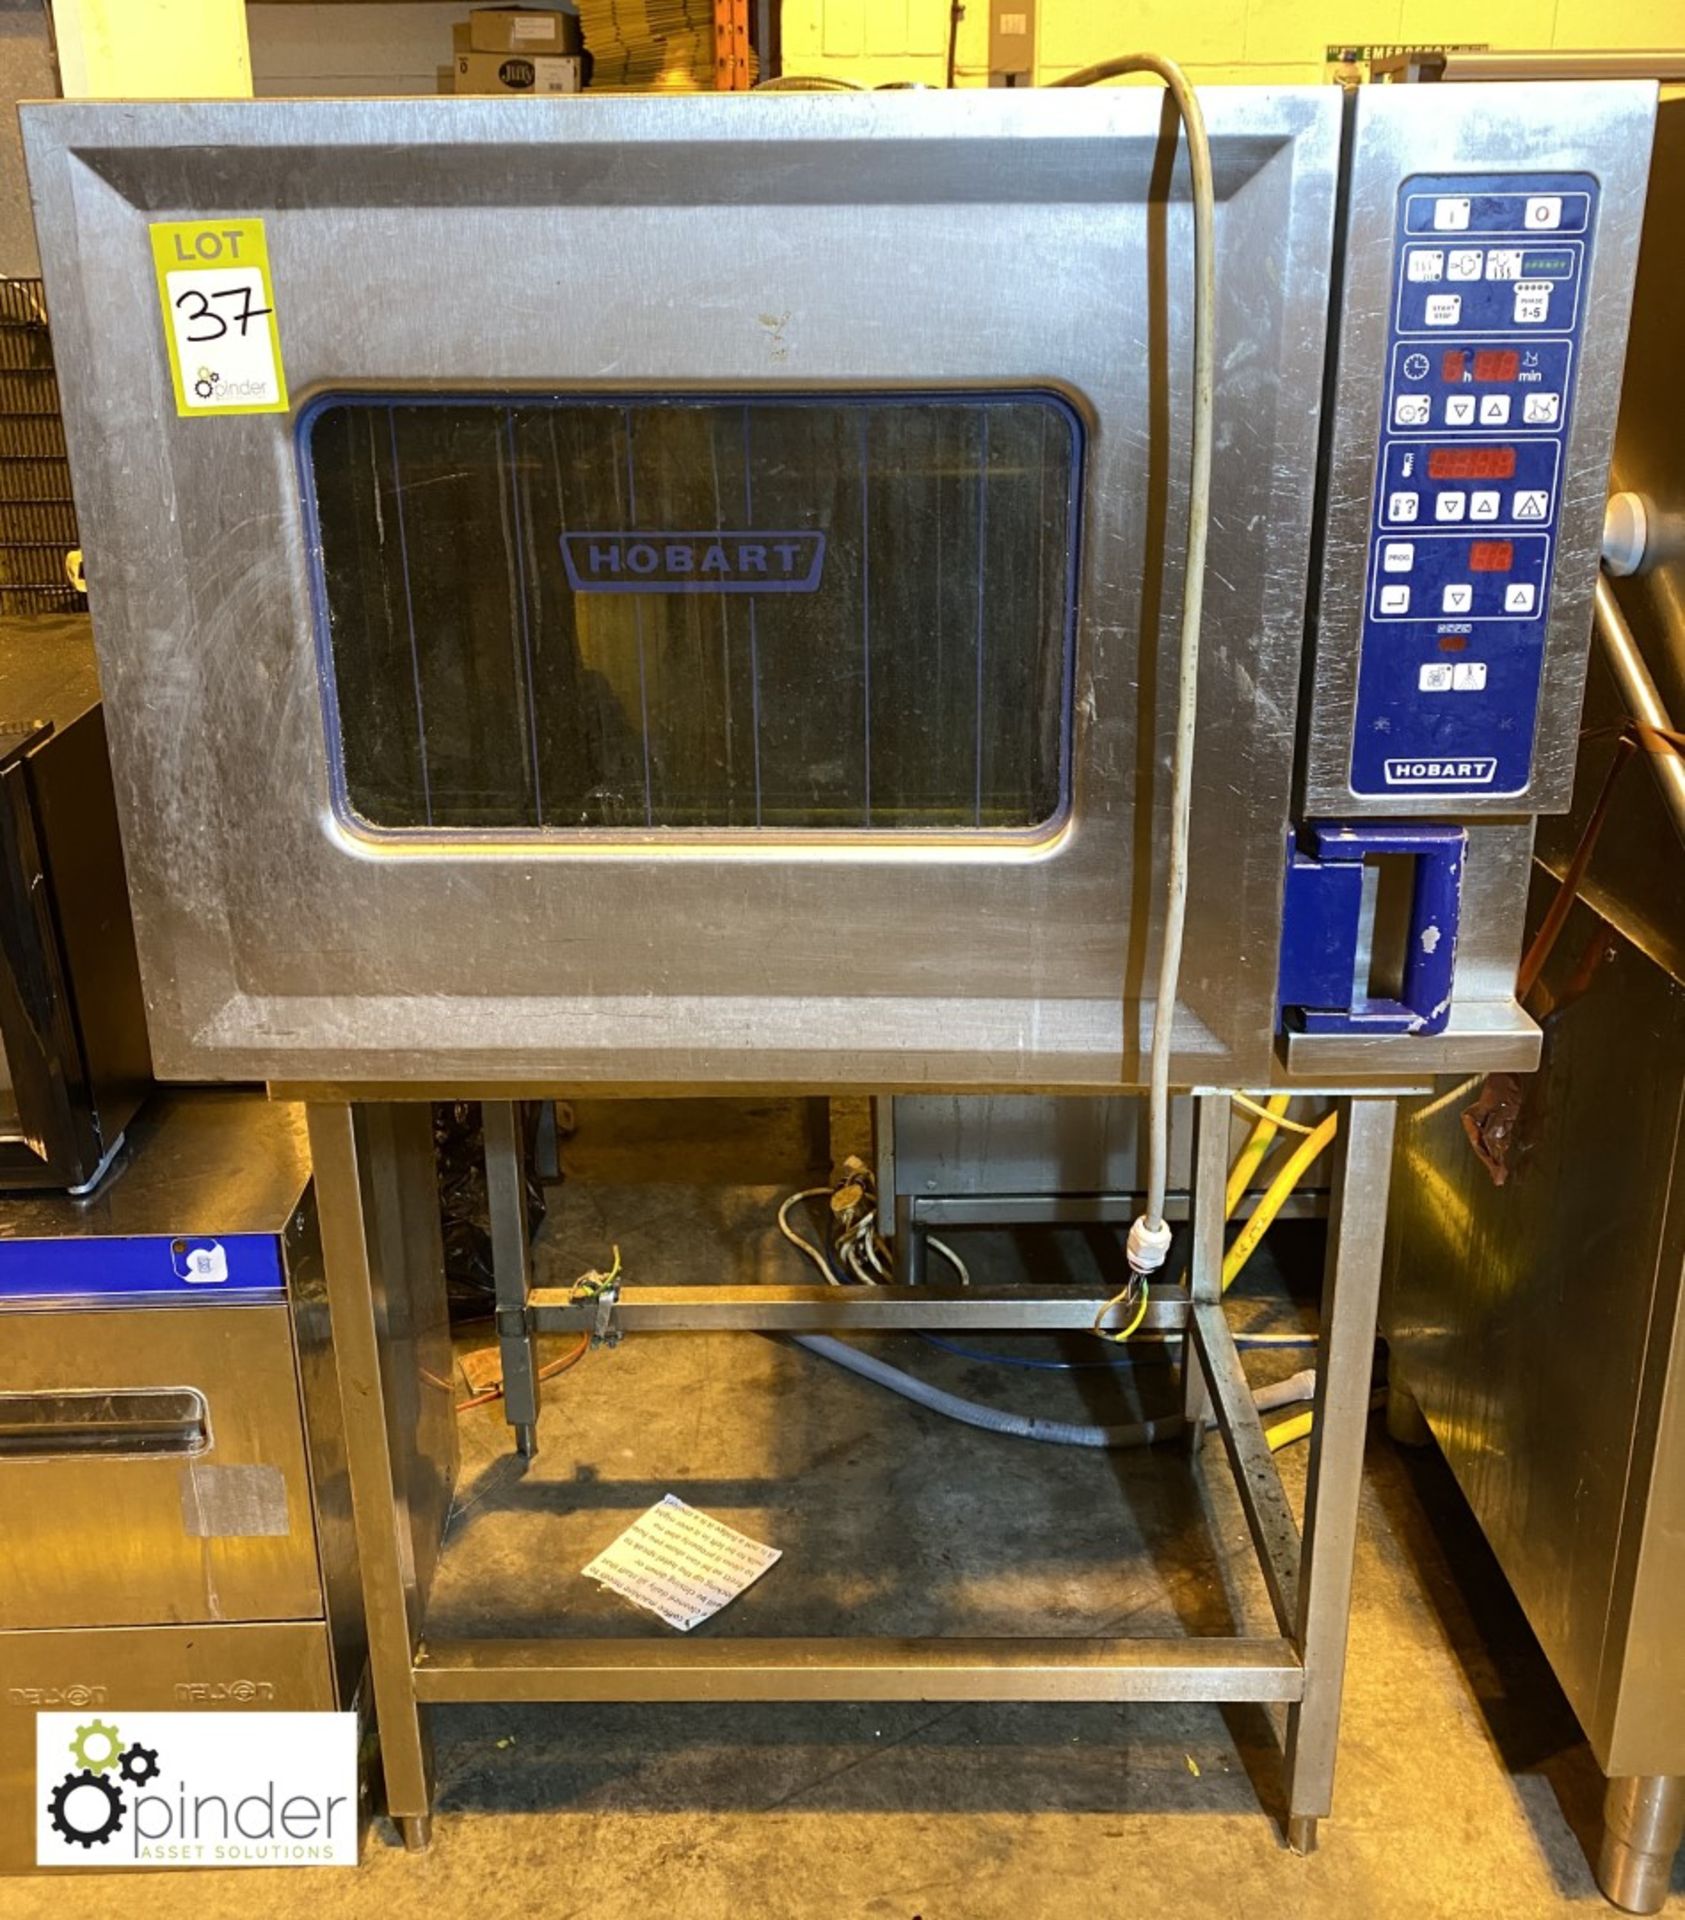 Hobart Combi Oven, 400volts, with stand